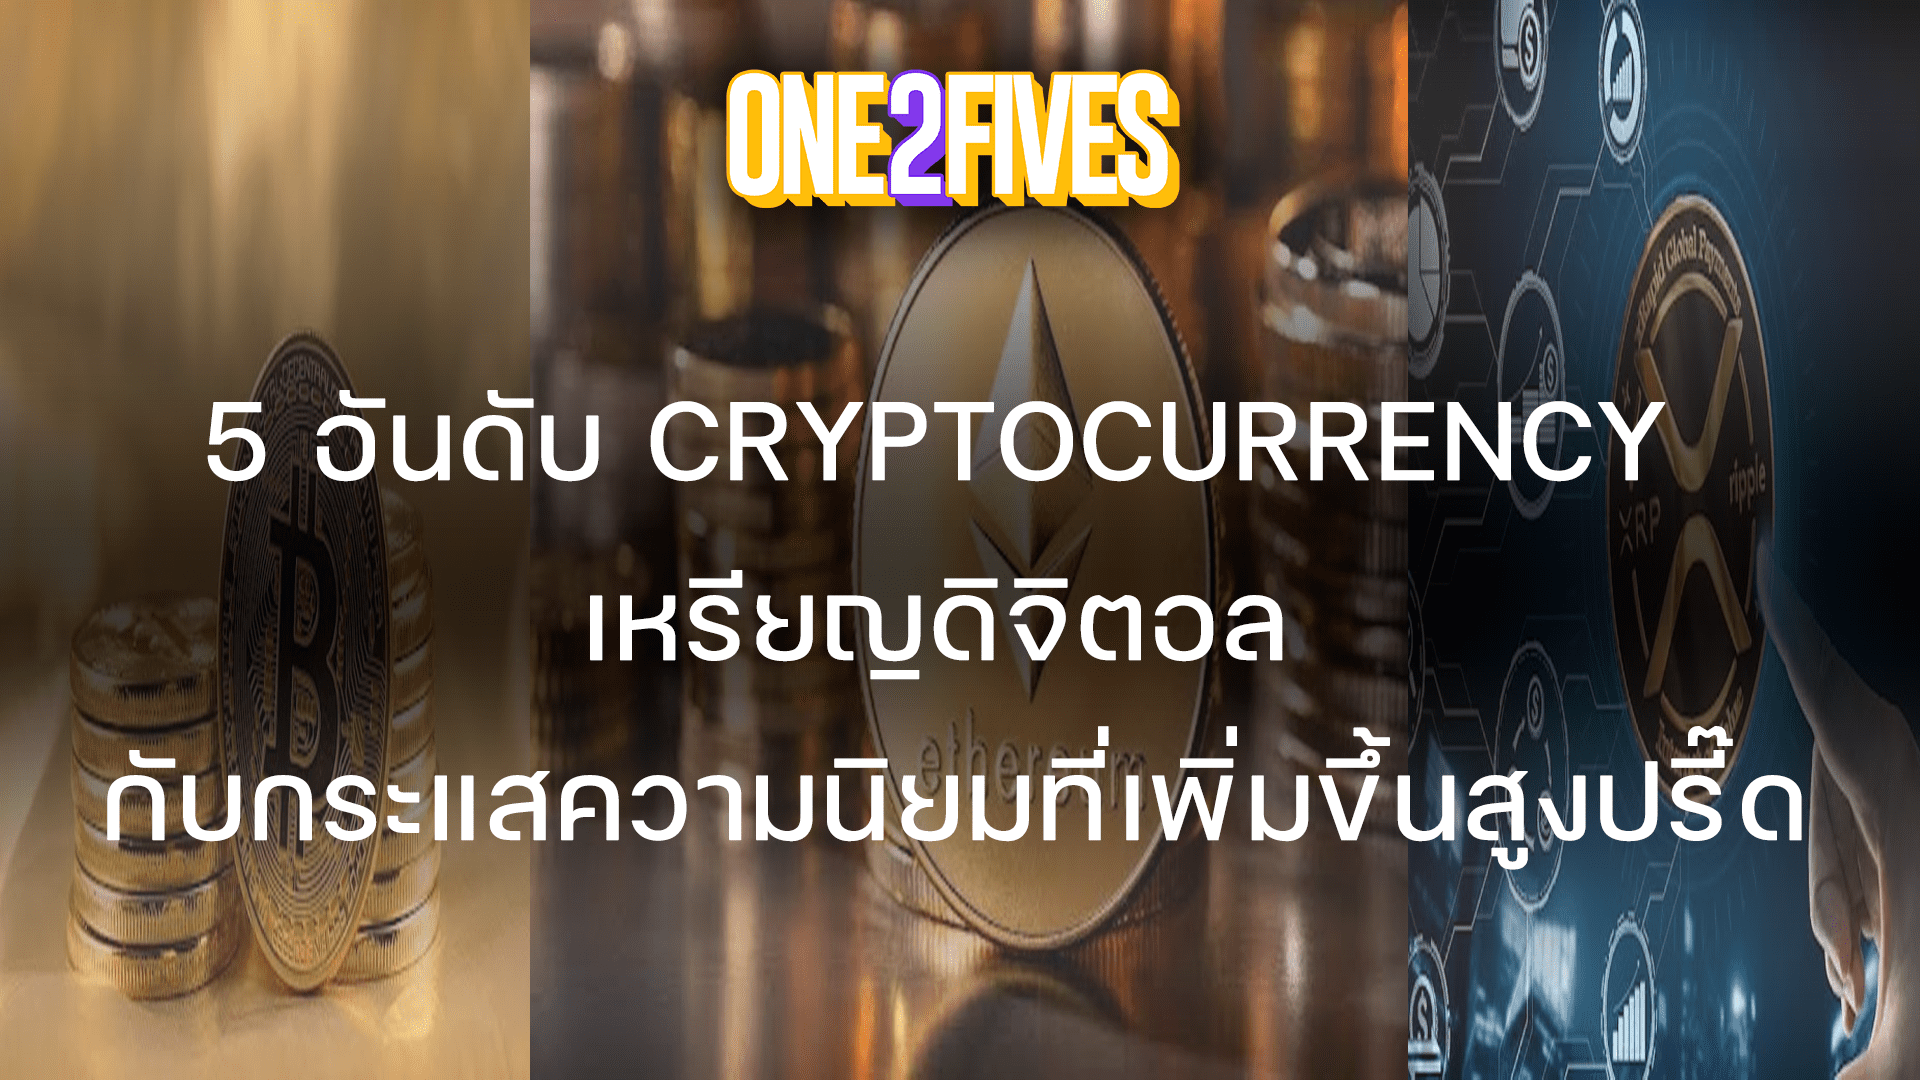 CRYPTOCURRENCY